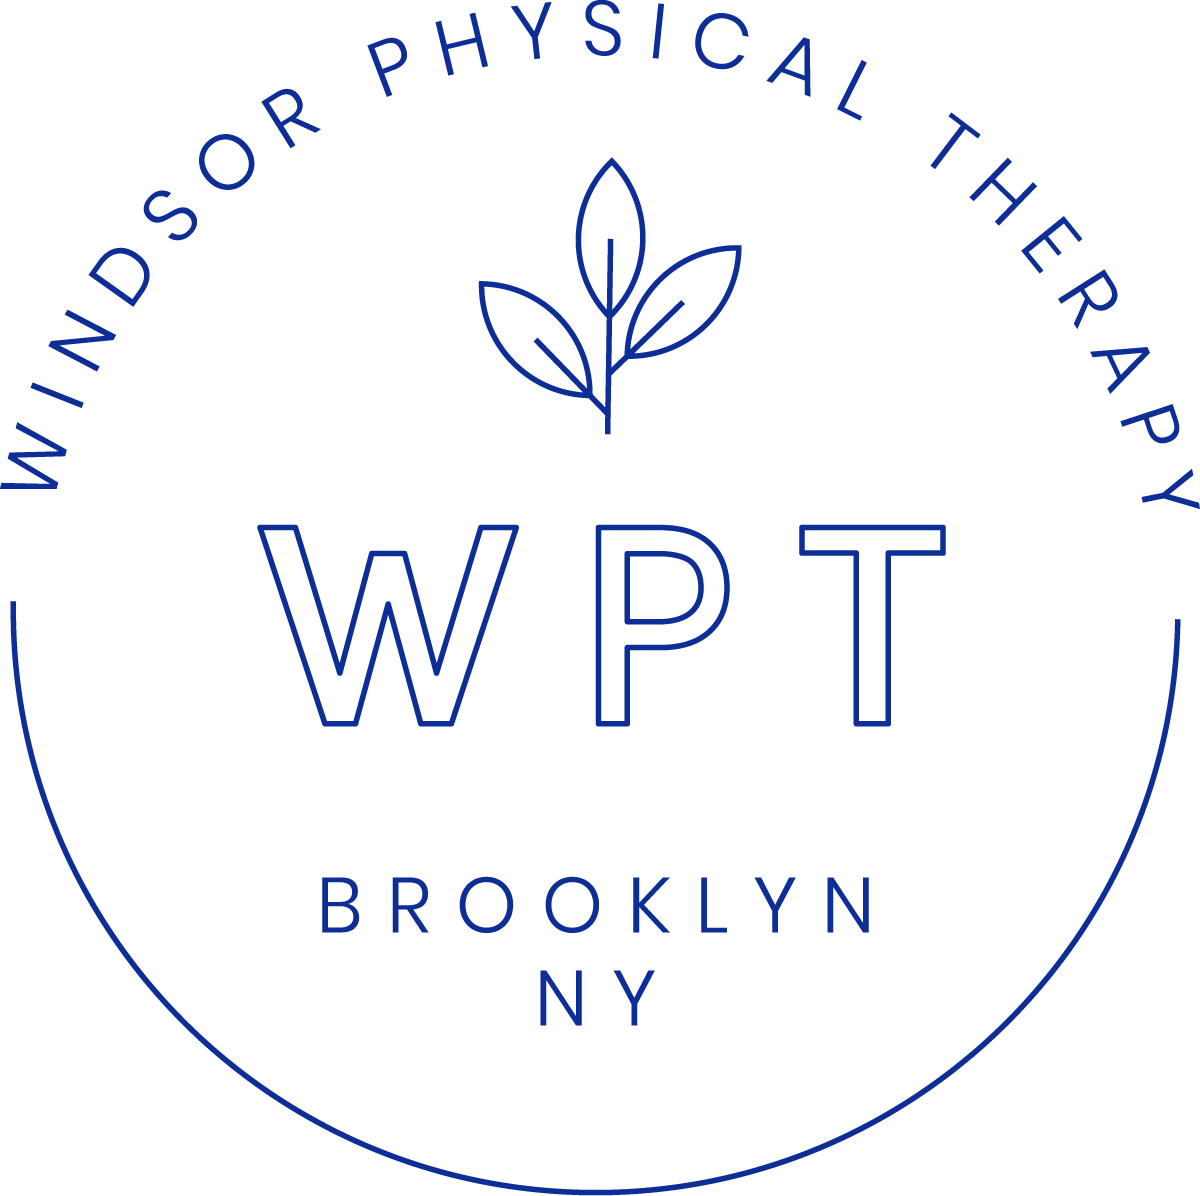 Windsor Physical Therapy